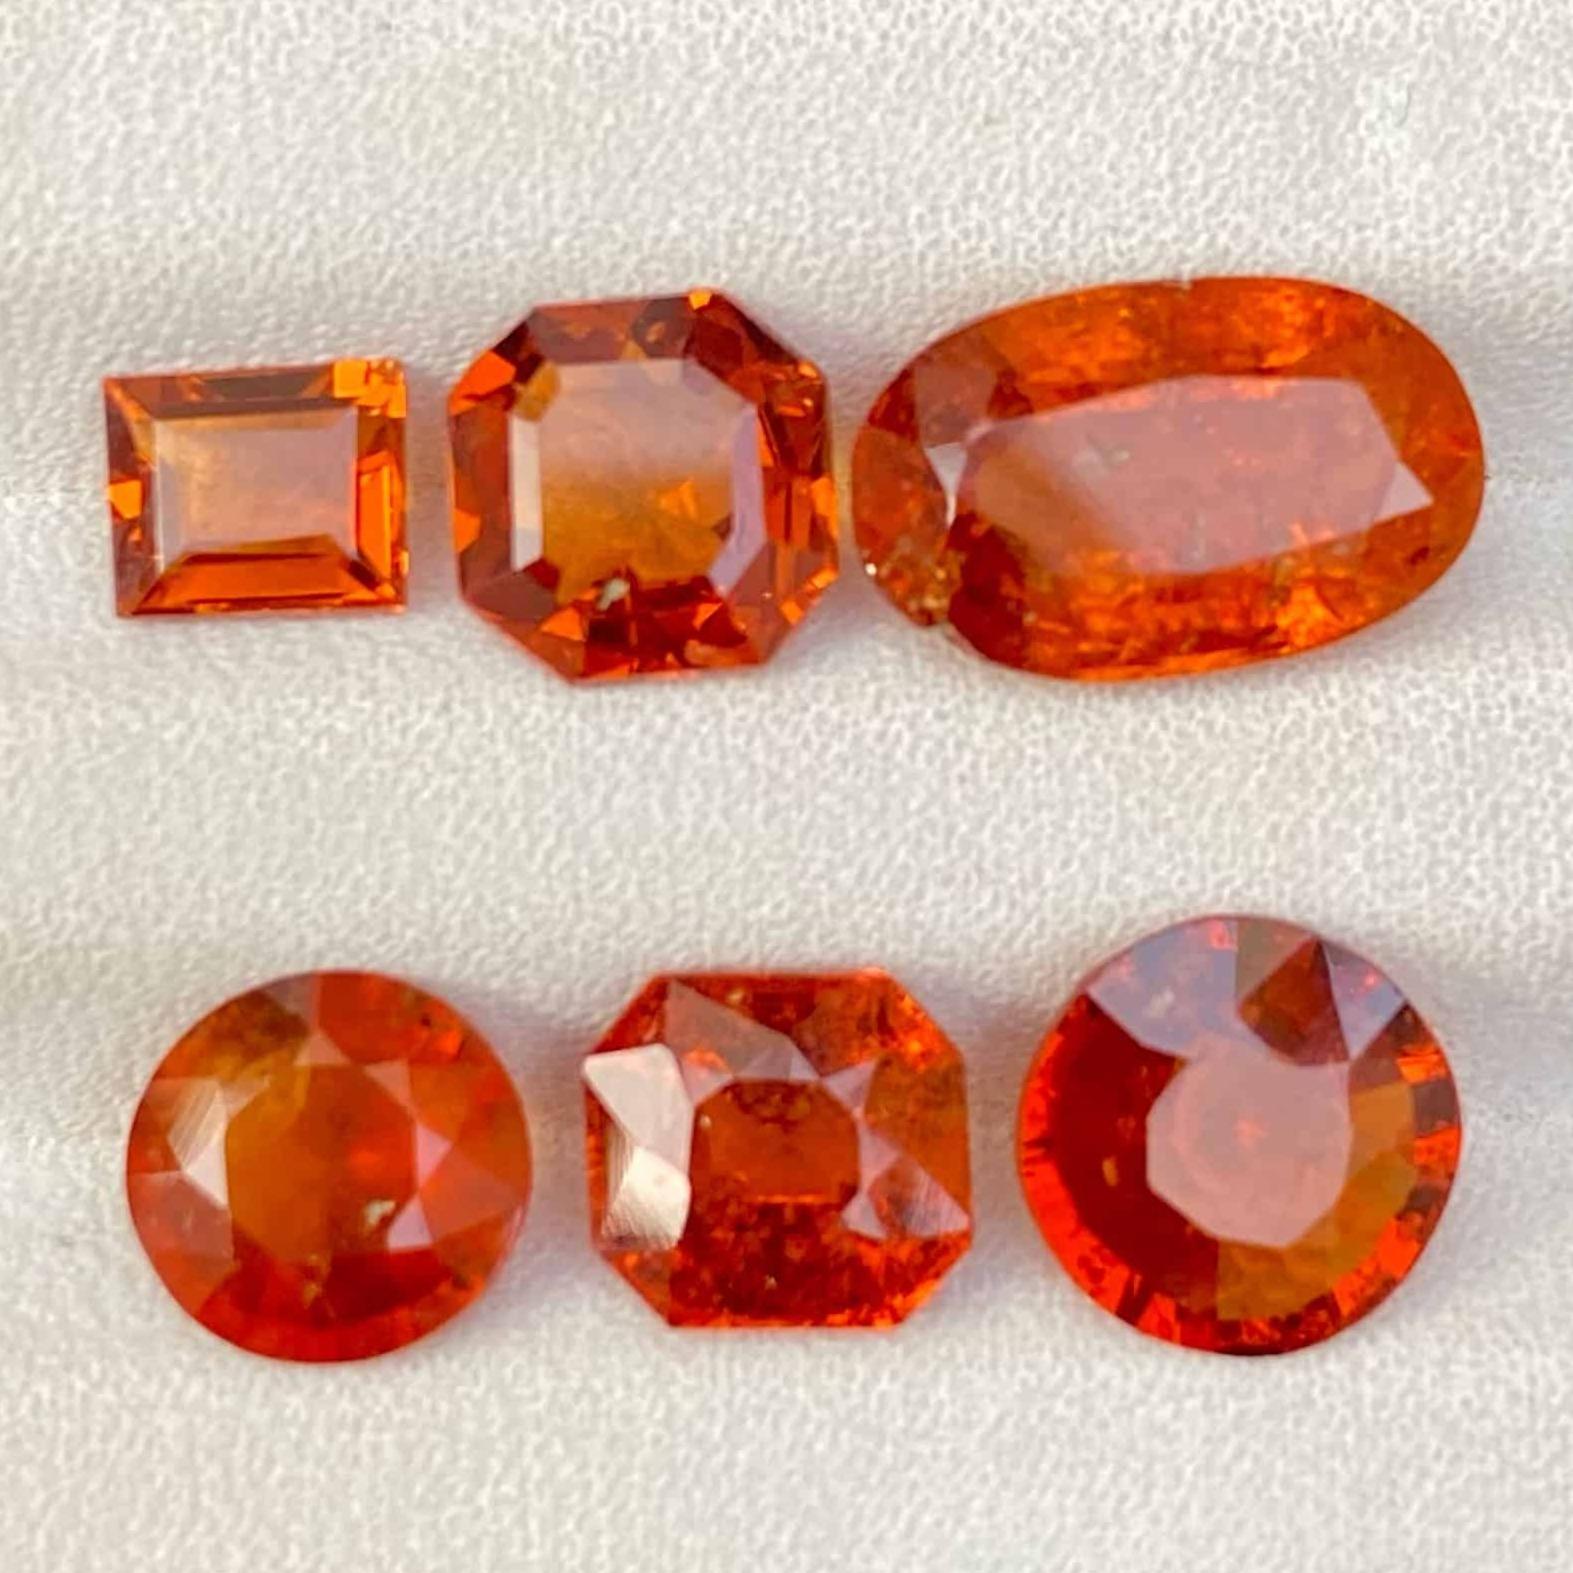 Gemstone Type Natural Spessartite Garnet Lot
Weight 12.15 carats
Size	0.80 to 4.0 carats
Clarity Slightly Included (SI)
Origin Africa
Treatment None





Discover the warm and vibrant allure of our Natural Spessartite Orange Garnet Stones, a